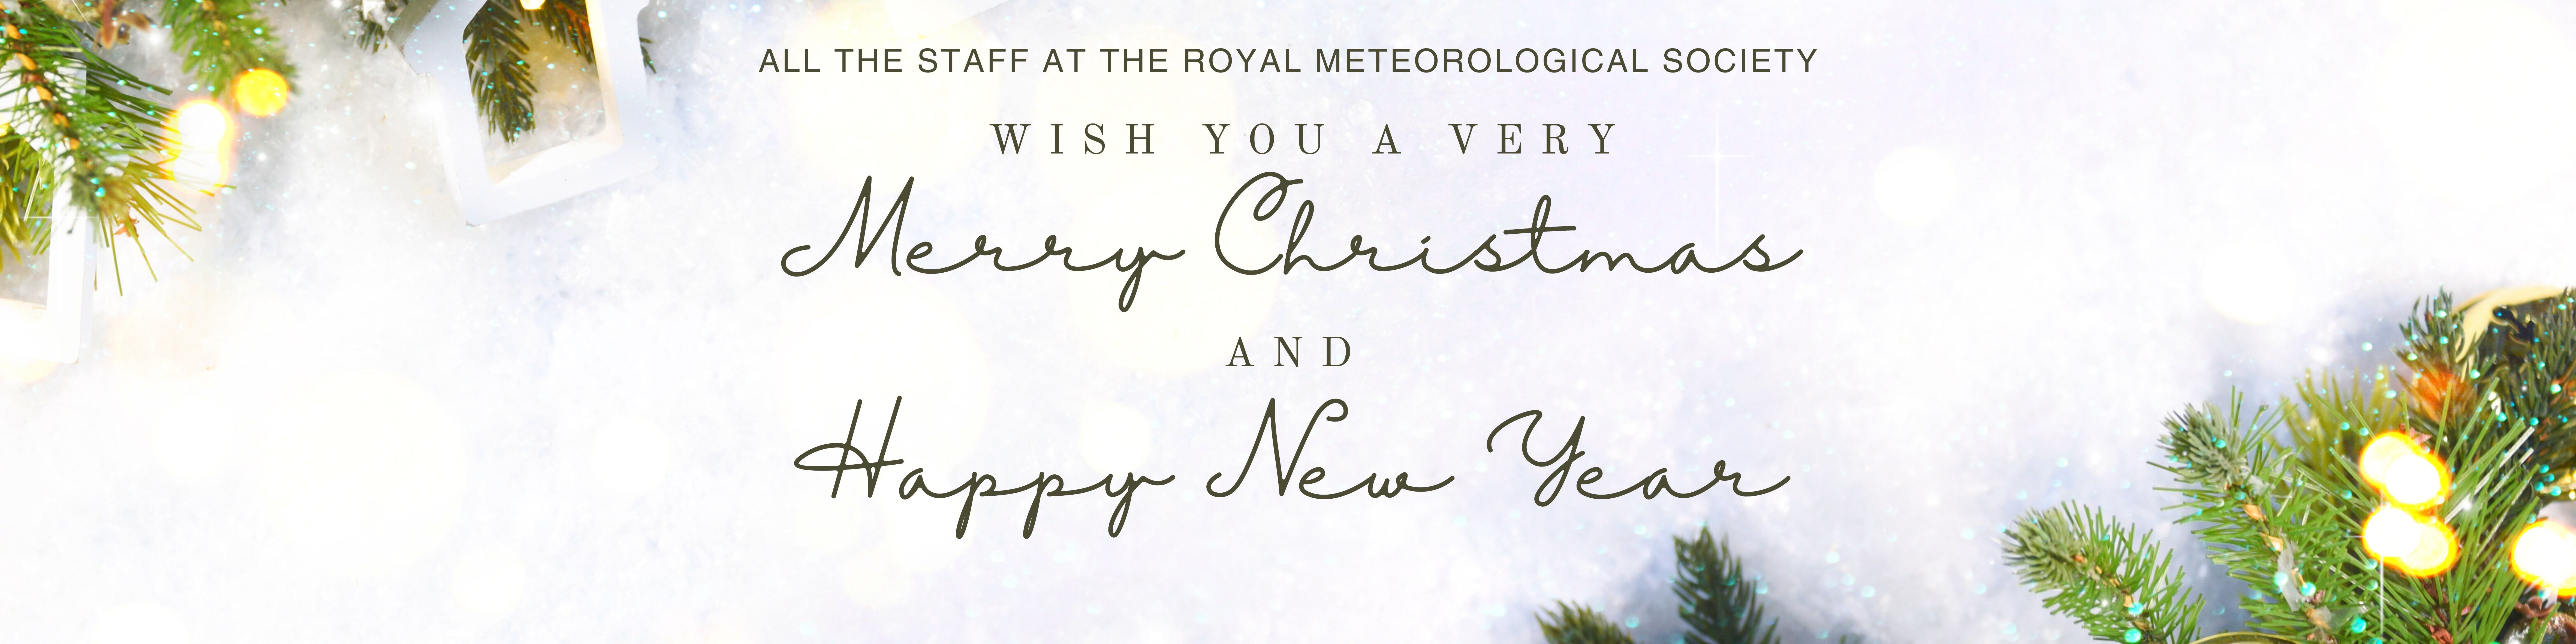 A frosty background with some christmas foliage and lights and text reading All the staff at the Royal Meteorological Society wish you a very Merry Christmas and Happy New Year